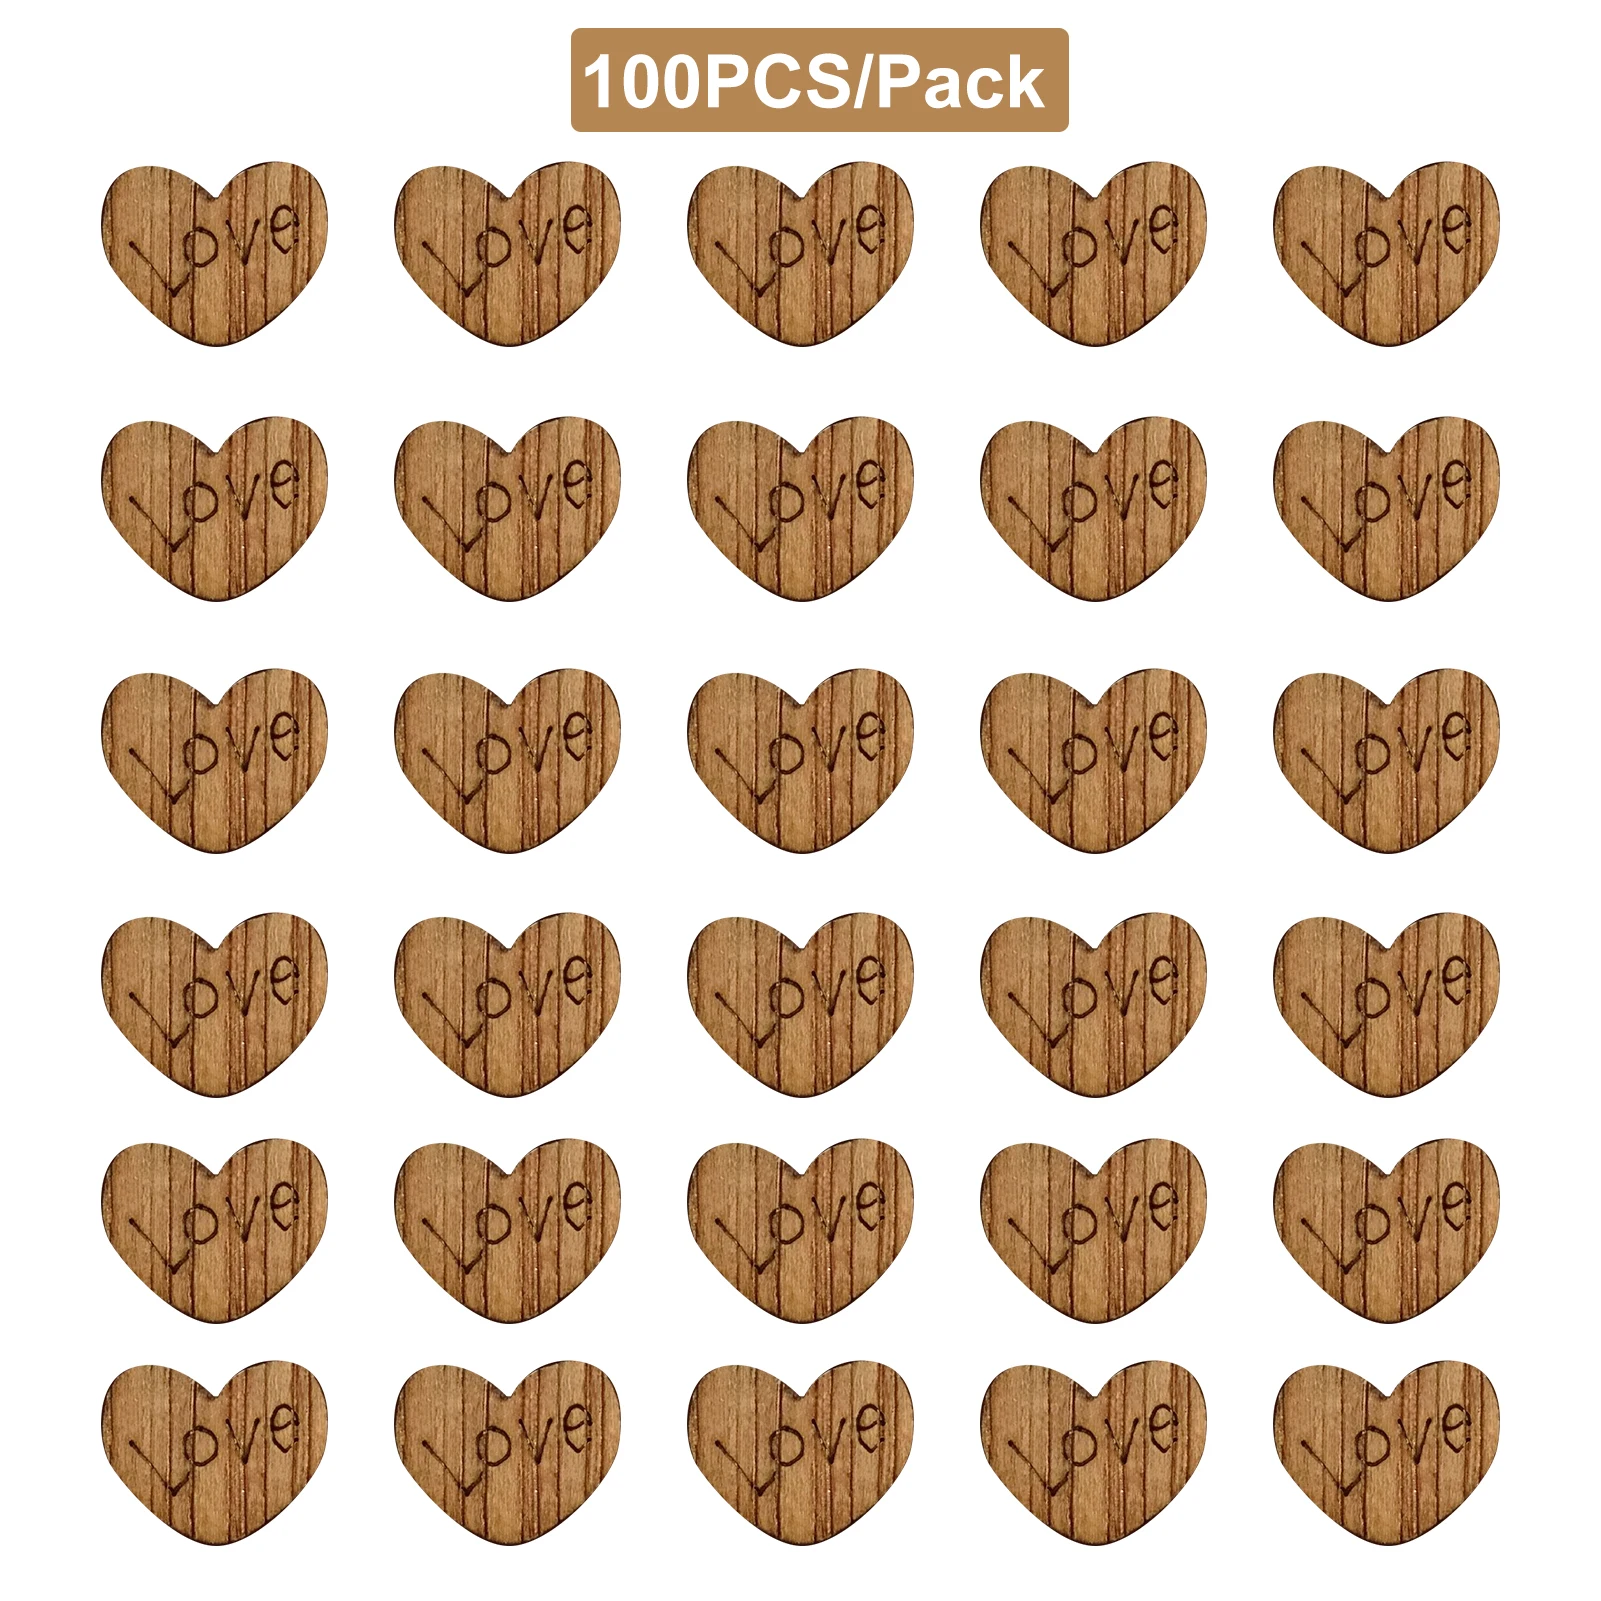 

100pcs Wood Slices Embellishments Rustic DIY Craft Love Heart Shape Natural Wedding Decor Small Cute Home Table Scatter Party